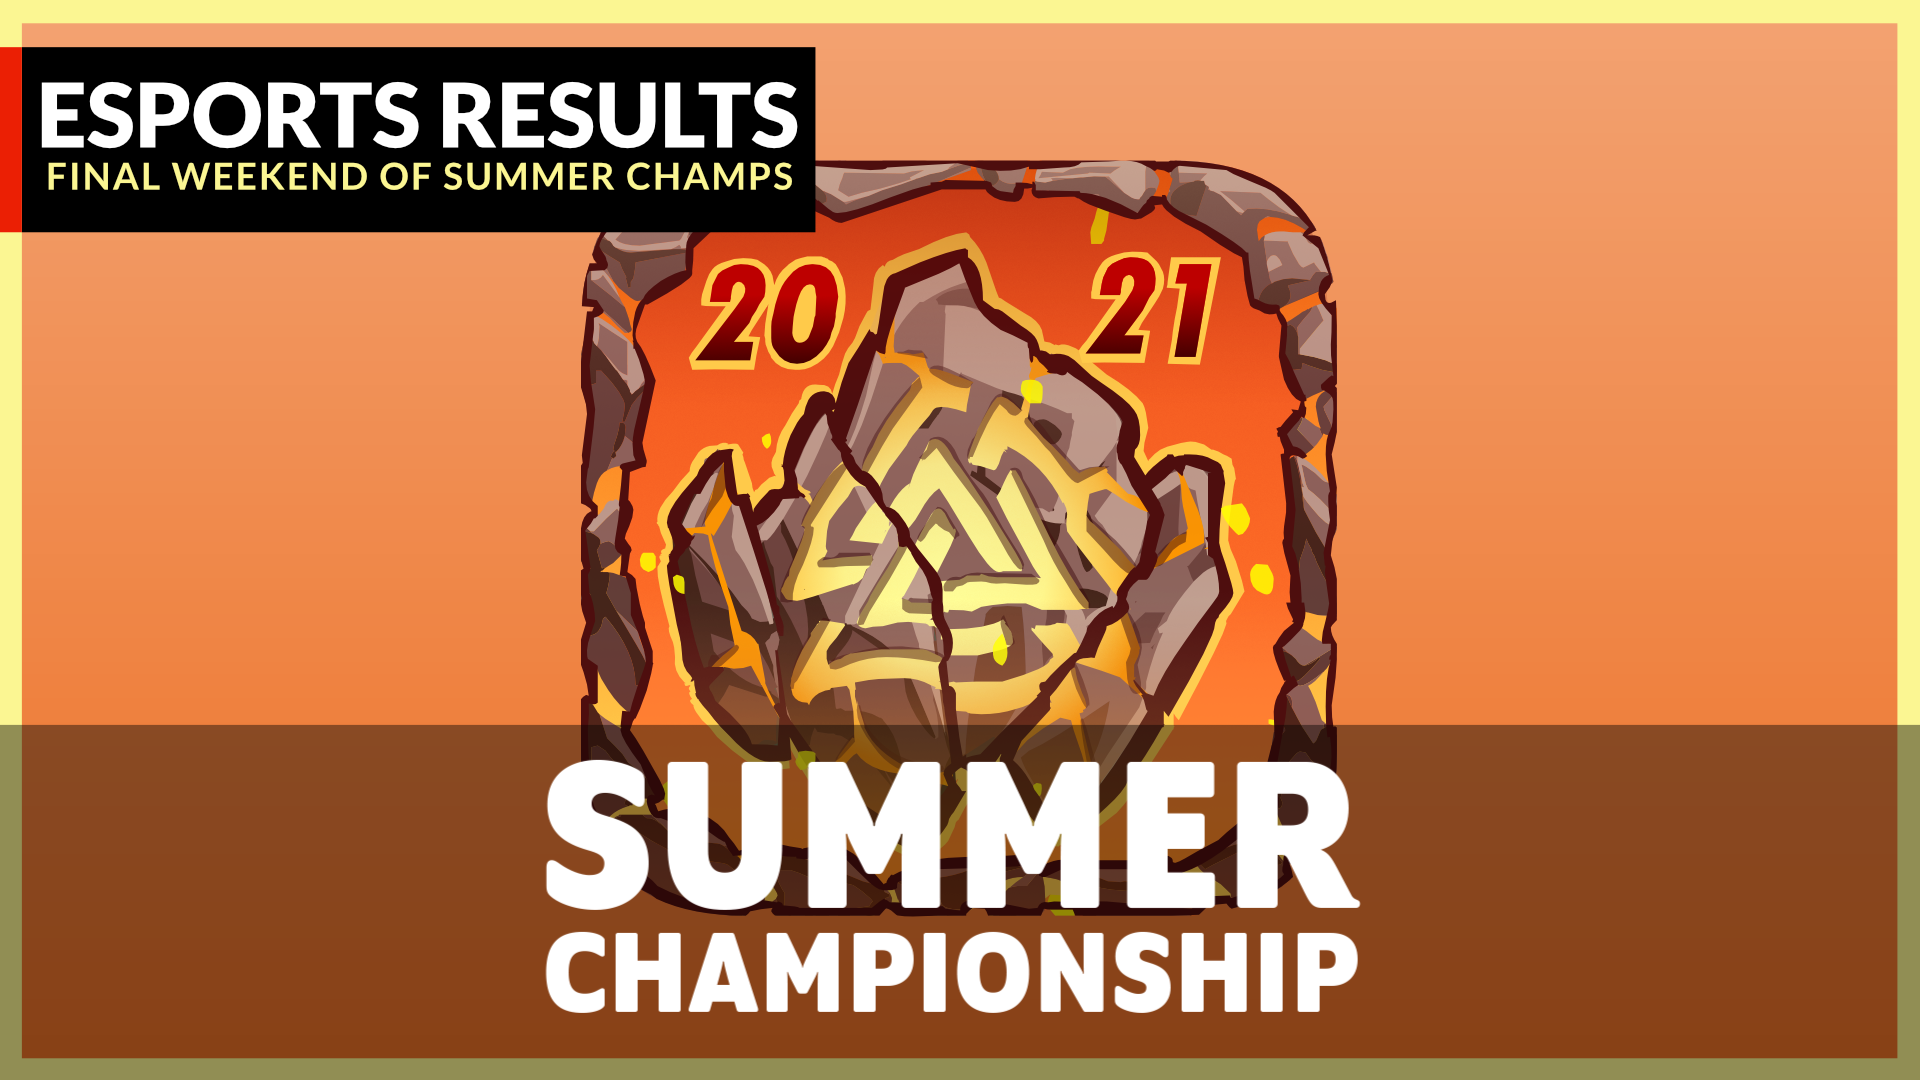 Snowy and Santy win the 2v2 North American Summer Championship!